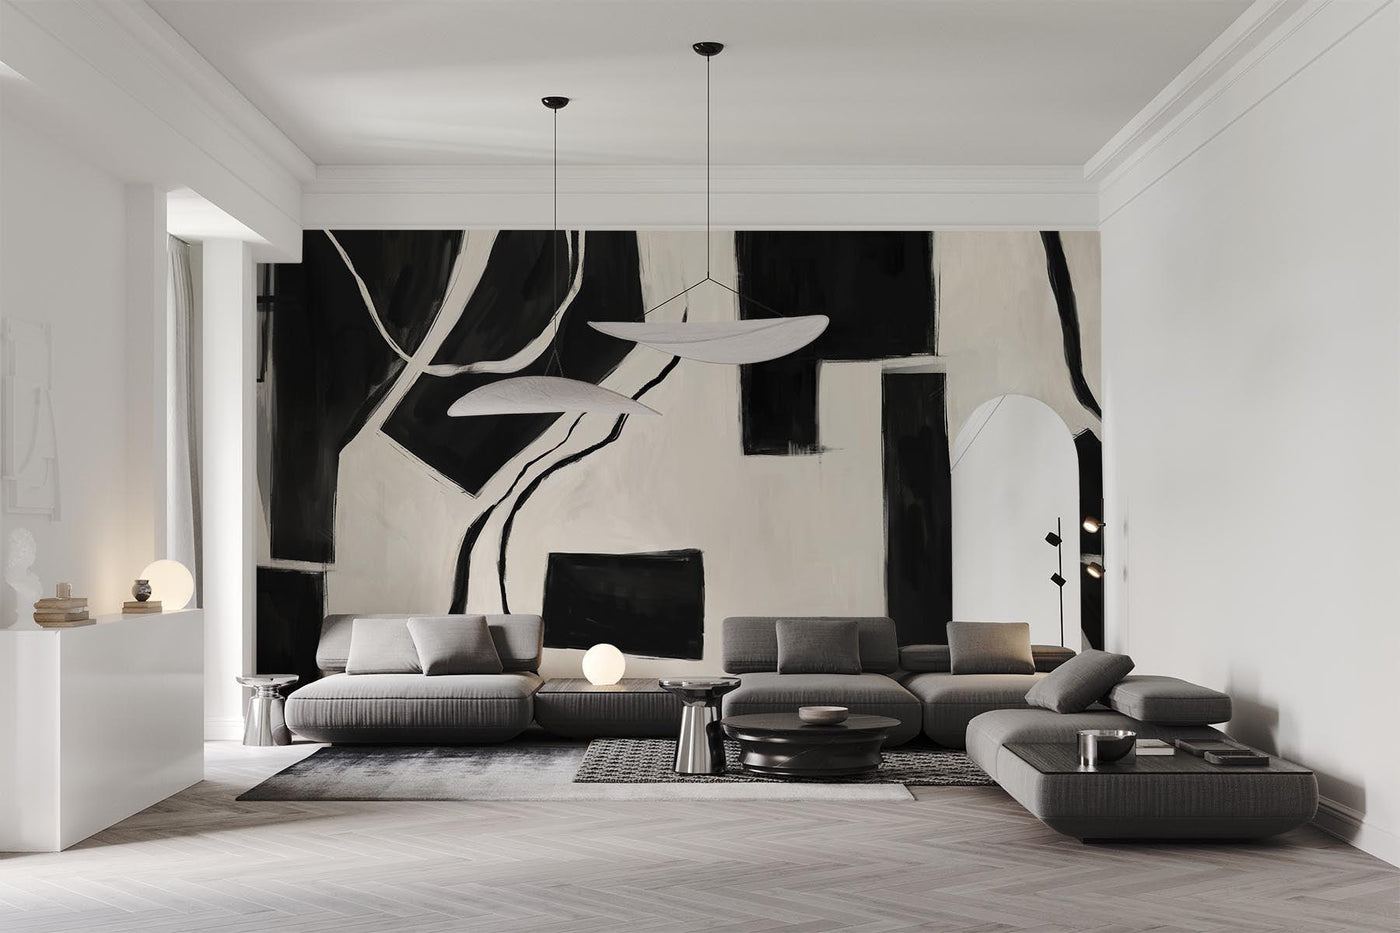 Black and white wall murals for a modern interior update. Black and white wallpaper sfor your bedroom, living room or dining room.